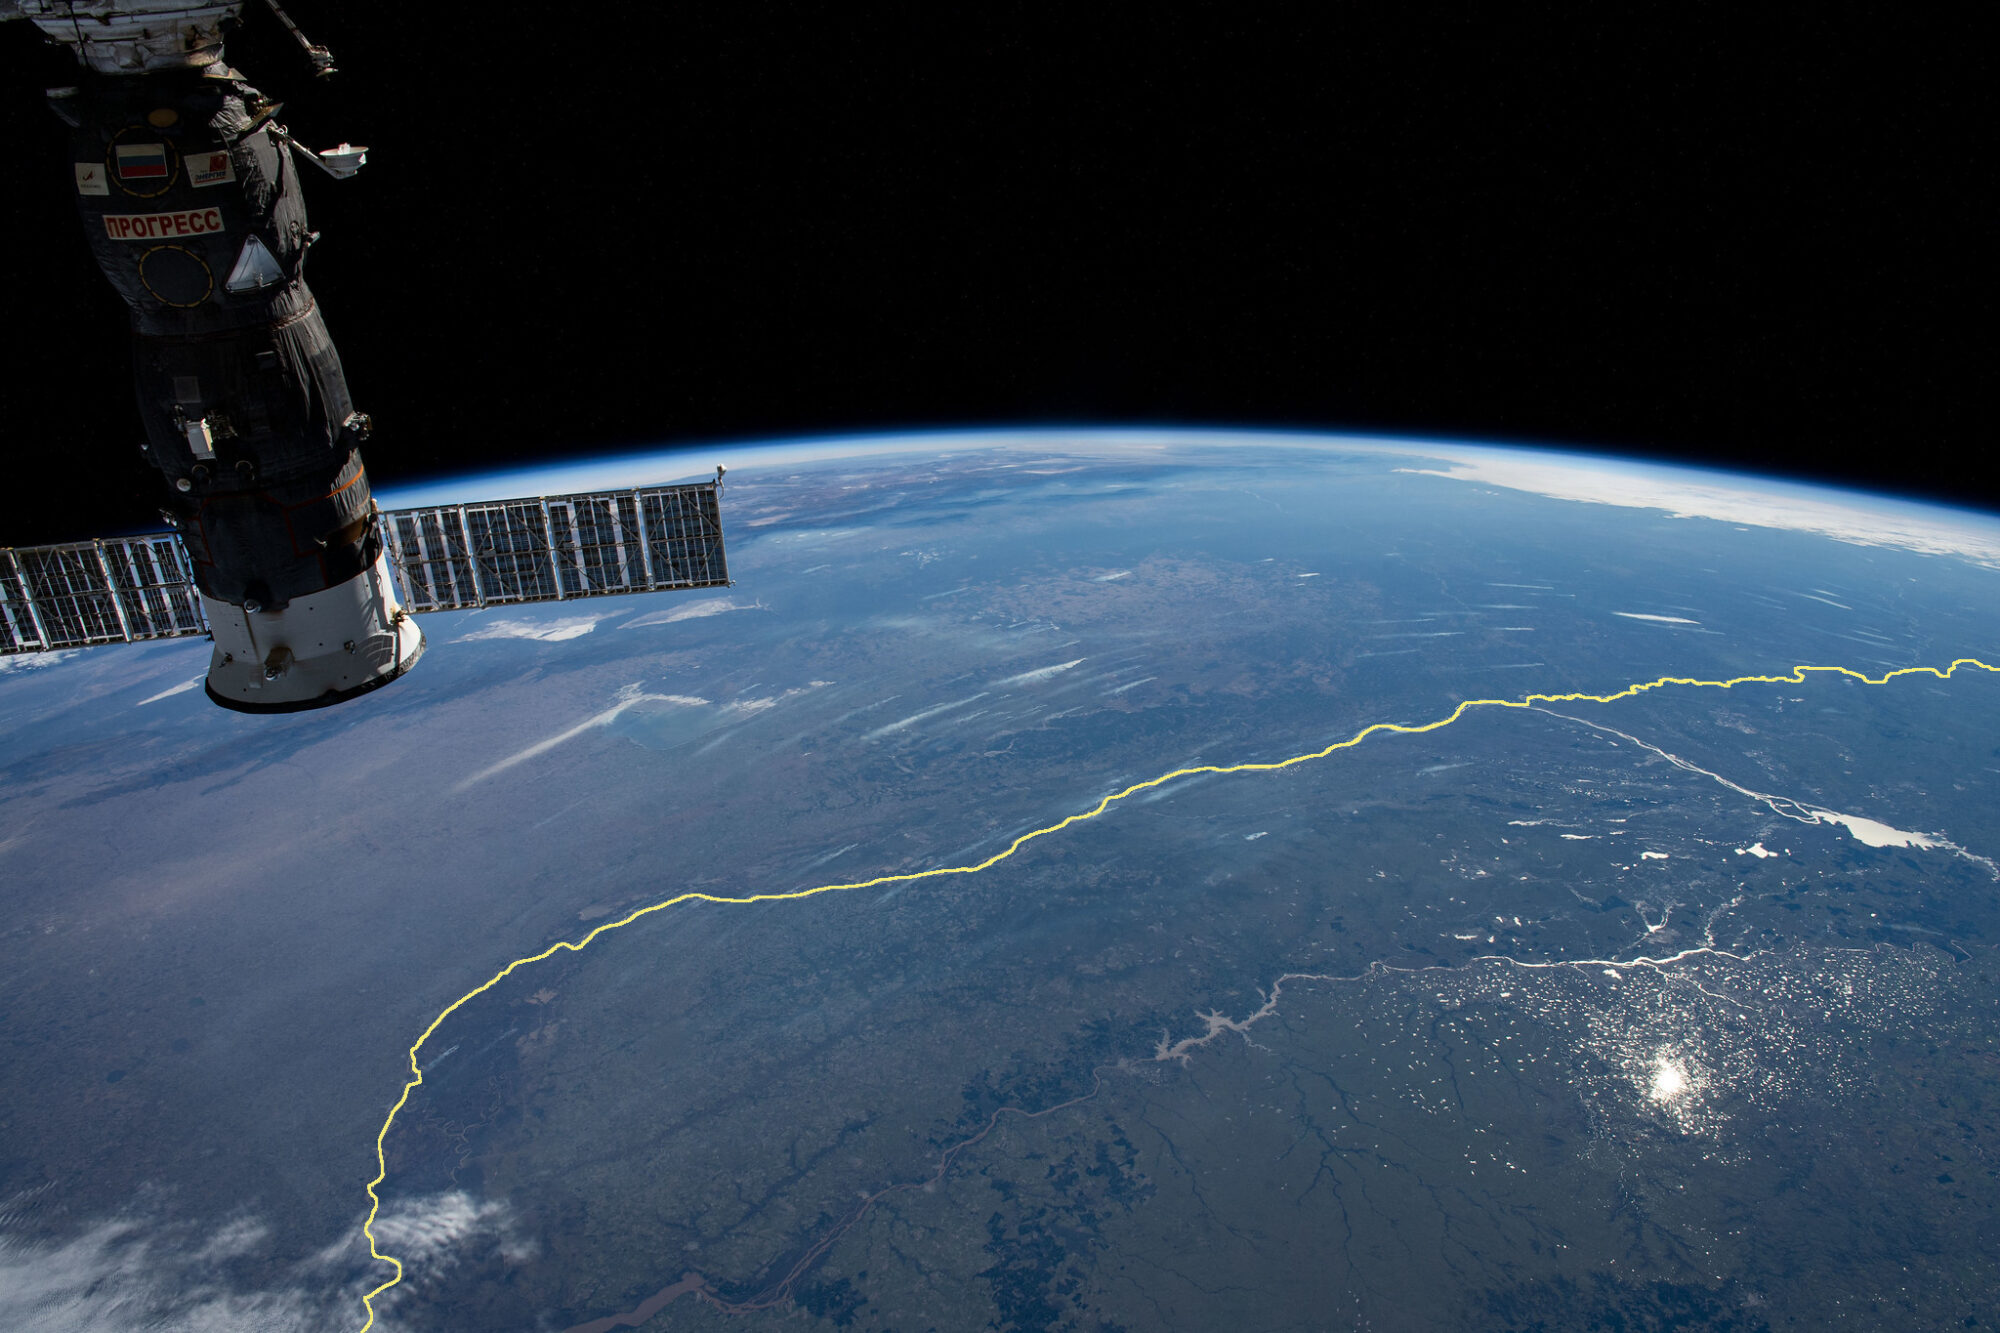 The paraná-paraguay waterway seen from space